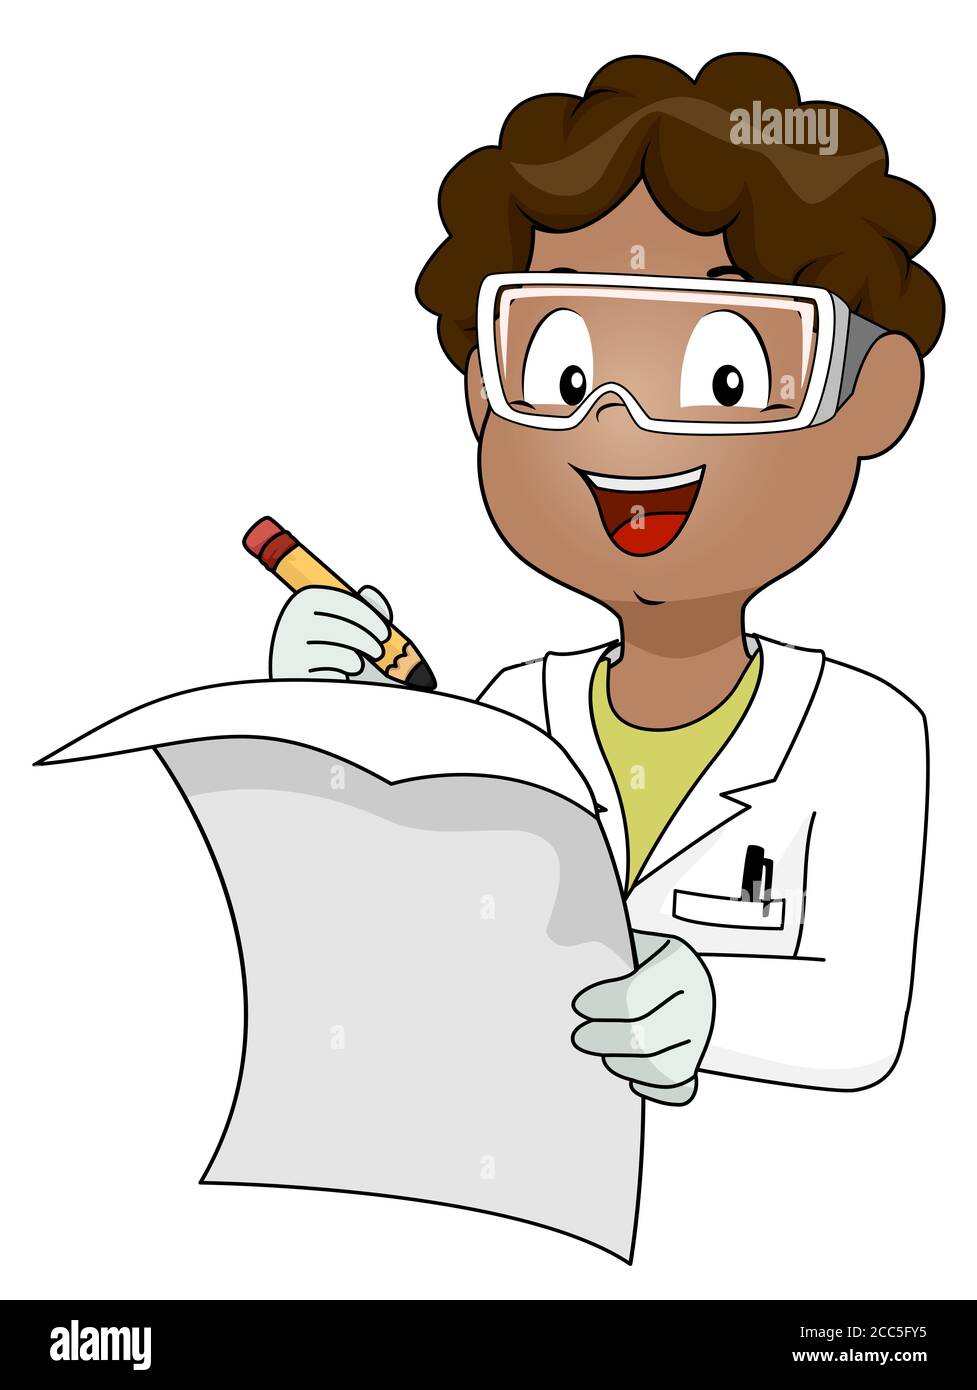 Illustration of an African American Kid Boy Wearing Laboratory Gown, Gloves and Goggles and Writing Findings on Paper Stock Photo